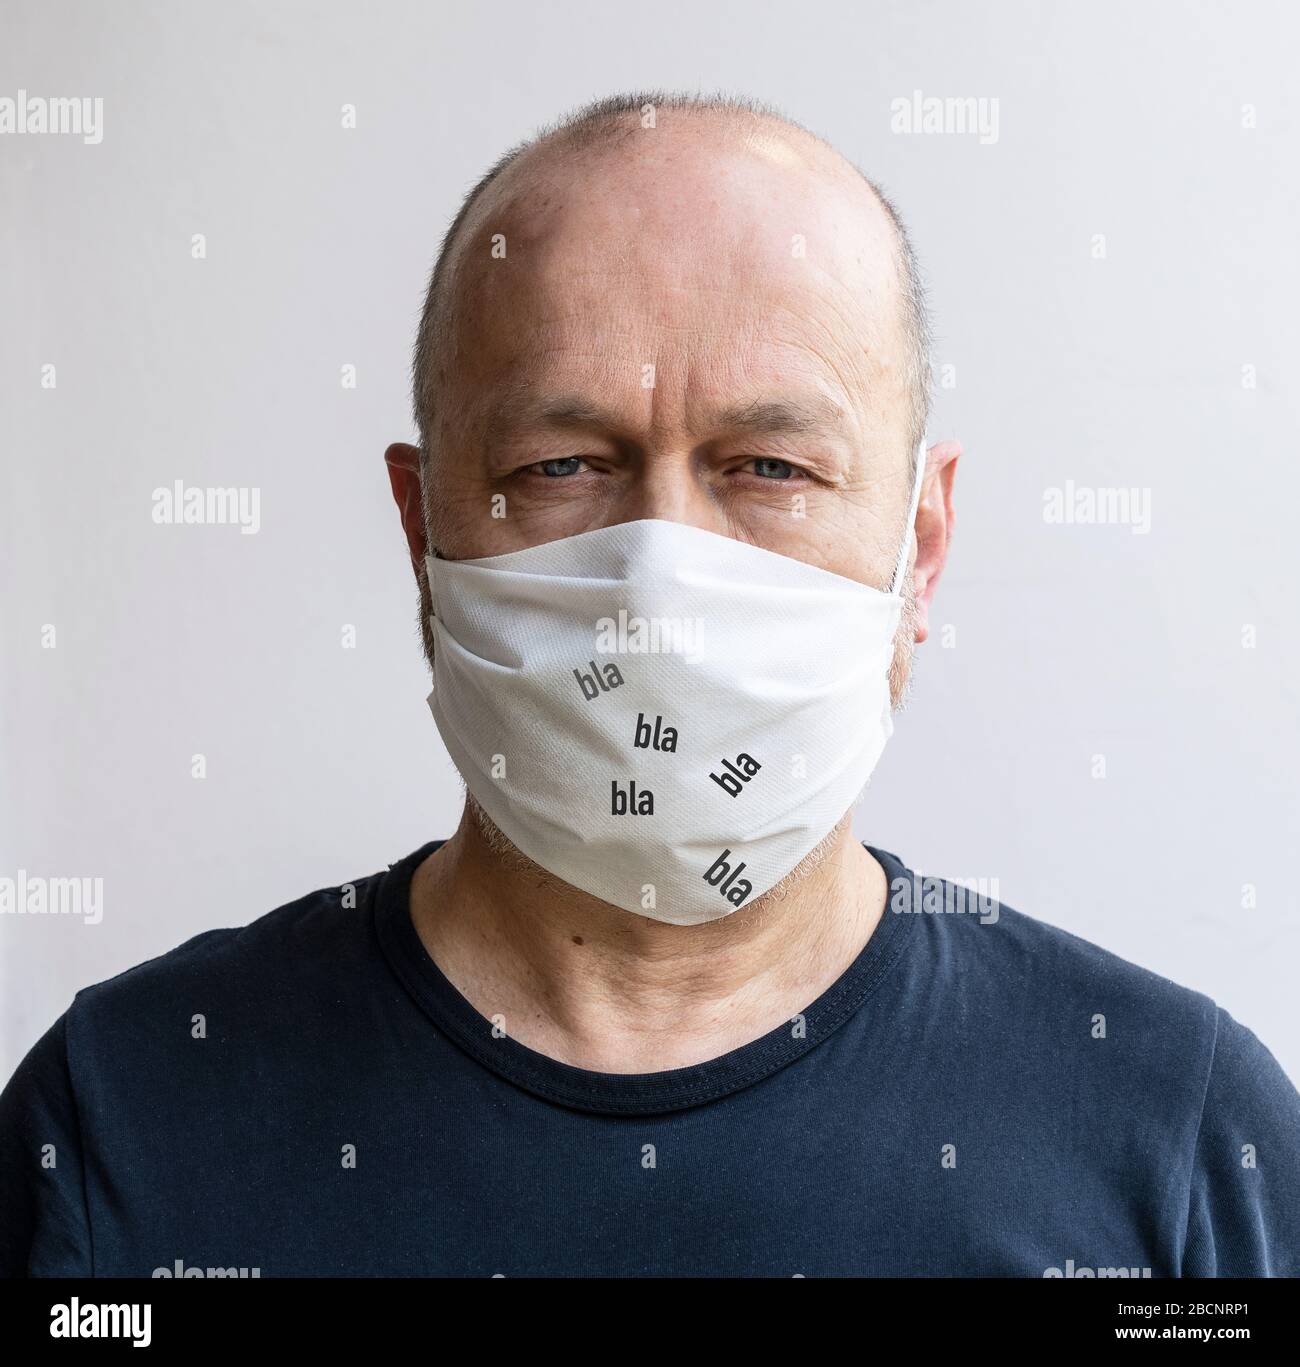 Have a conversation with the protective mask in front of your mouth during the coronavirus period Stock Photo